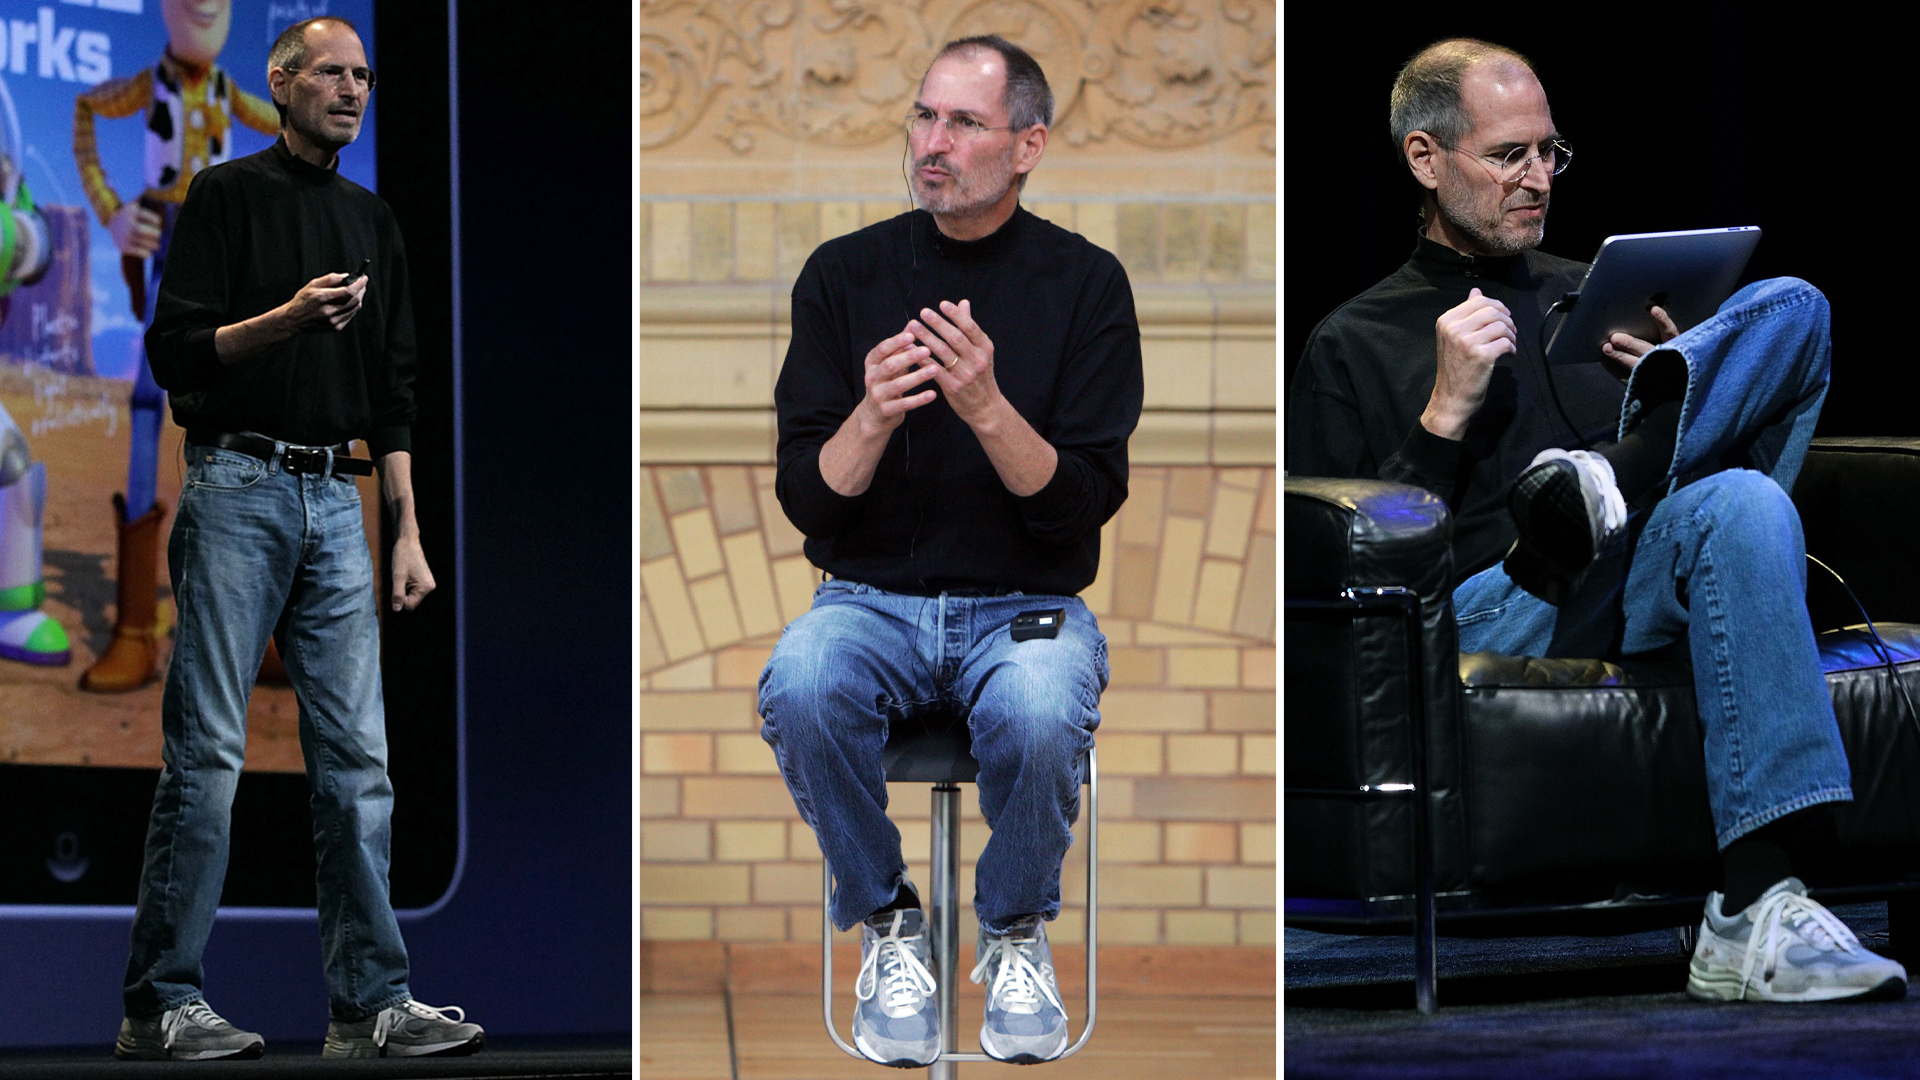 Why Steve Jobs always wore the same thing